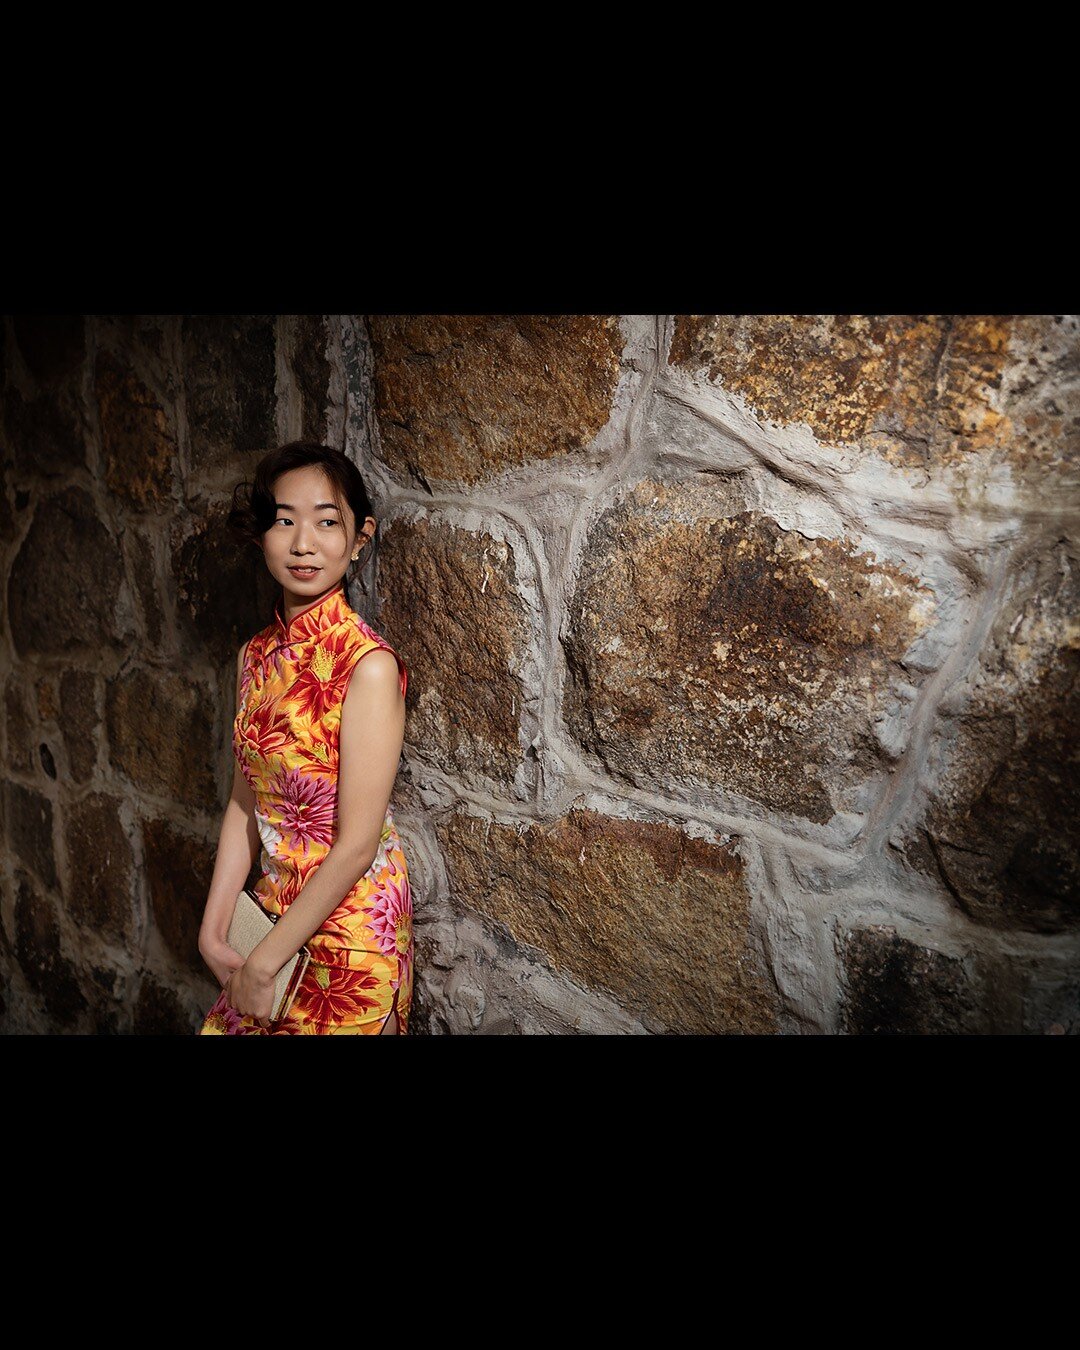 \\ QI PAO SERIES
&quot;The story of the qipao is very romantic &ndash; in fact, it has been over-romanticised, disassociated from its original meaning and often mistaken as the Chinese traditional dress. In reality, the history of the qipao cannot qu